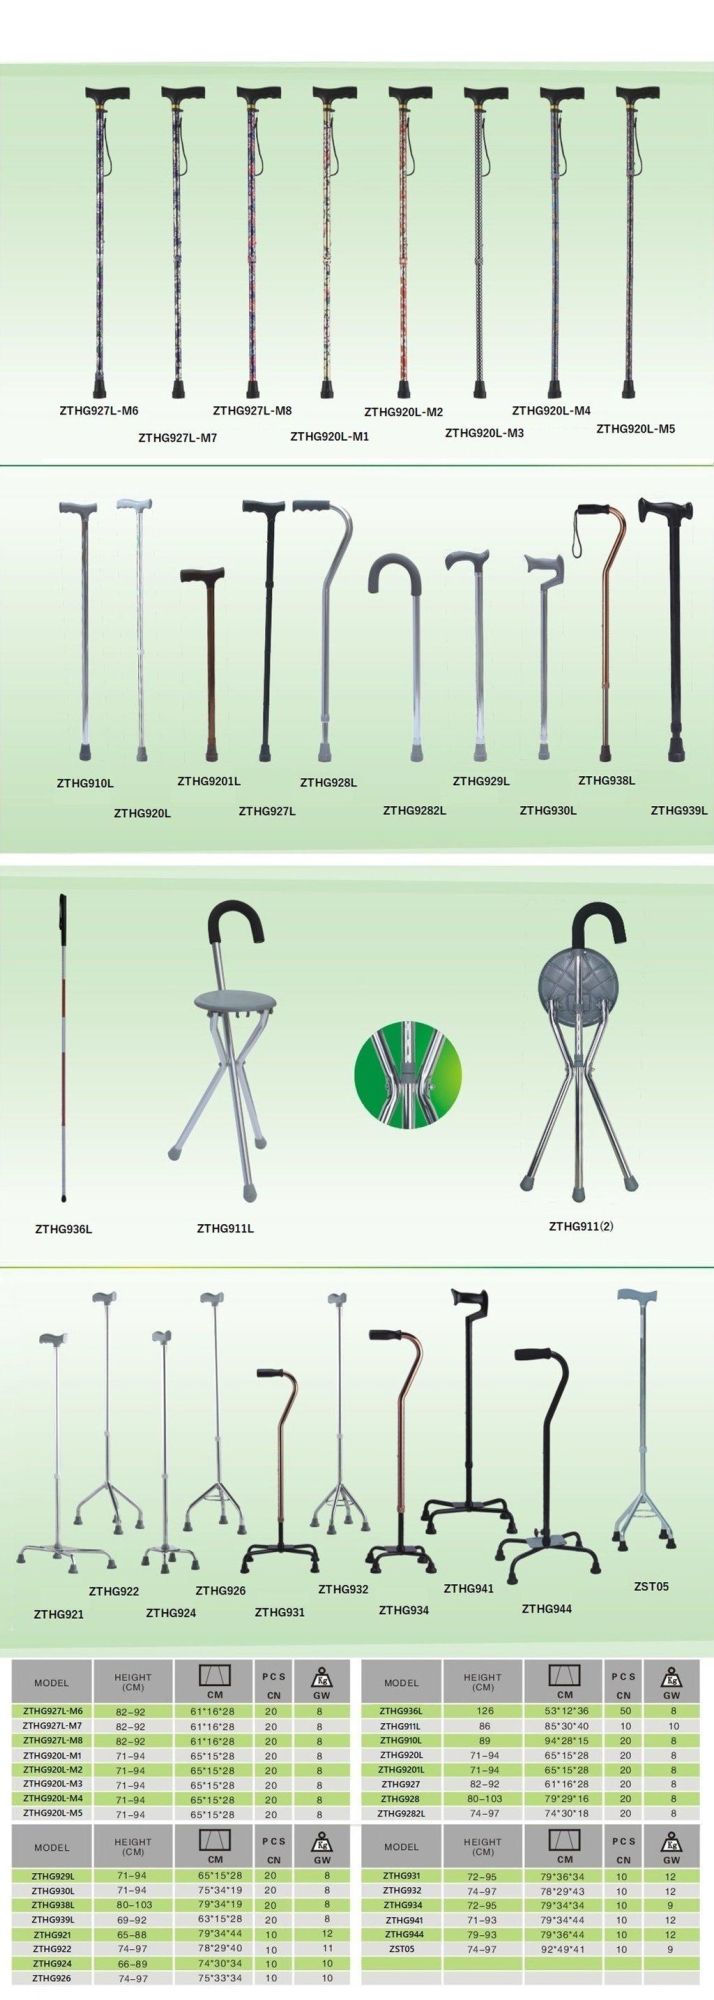 4 Legs Non-Slip Foot Pad Safety Outdoor Lightweight Crutch Multi Style Steel Adjustable Height Rehabilitation Walking Cane for Disabled/Elderly People